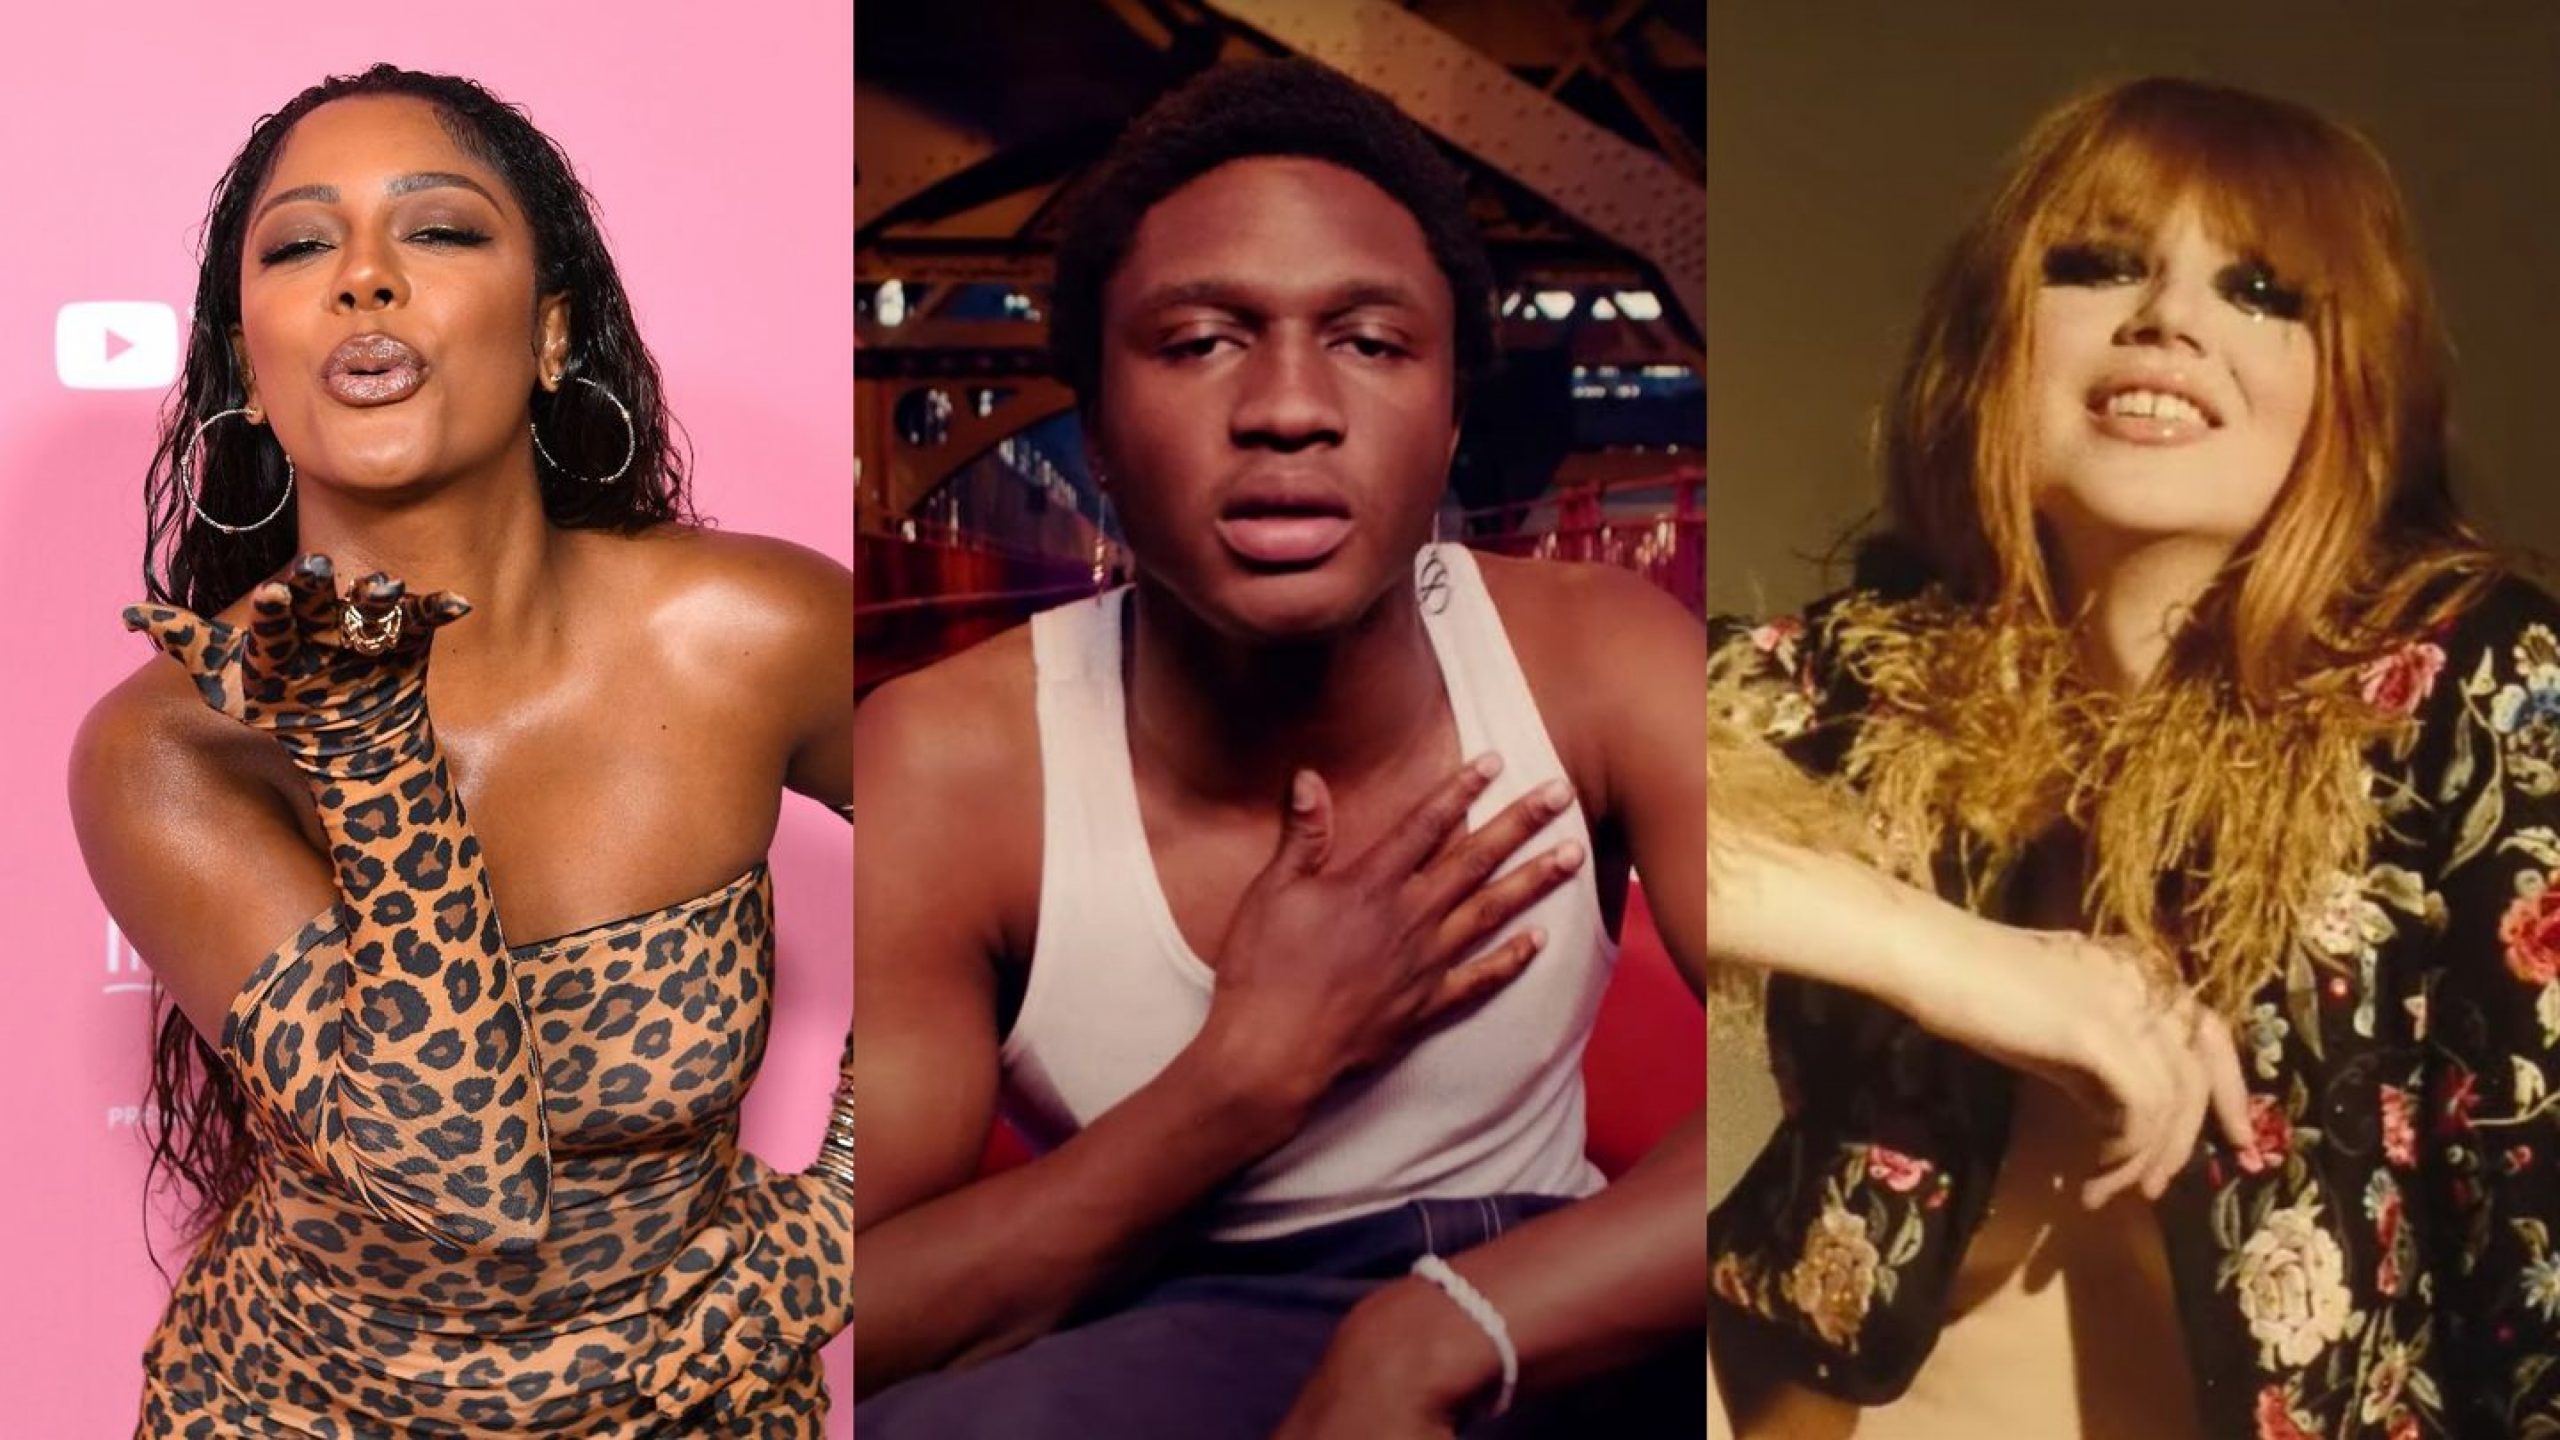 Bop Shop: Songs From Macy Rodman, Victoria Monét, Spencer, And More